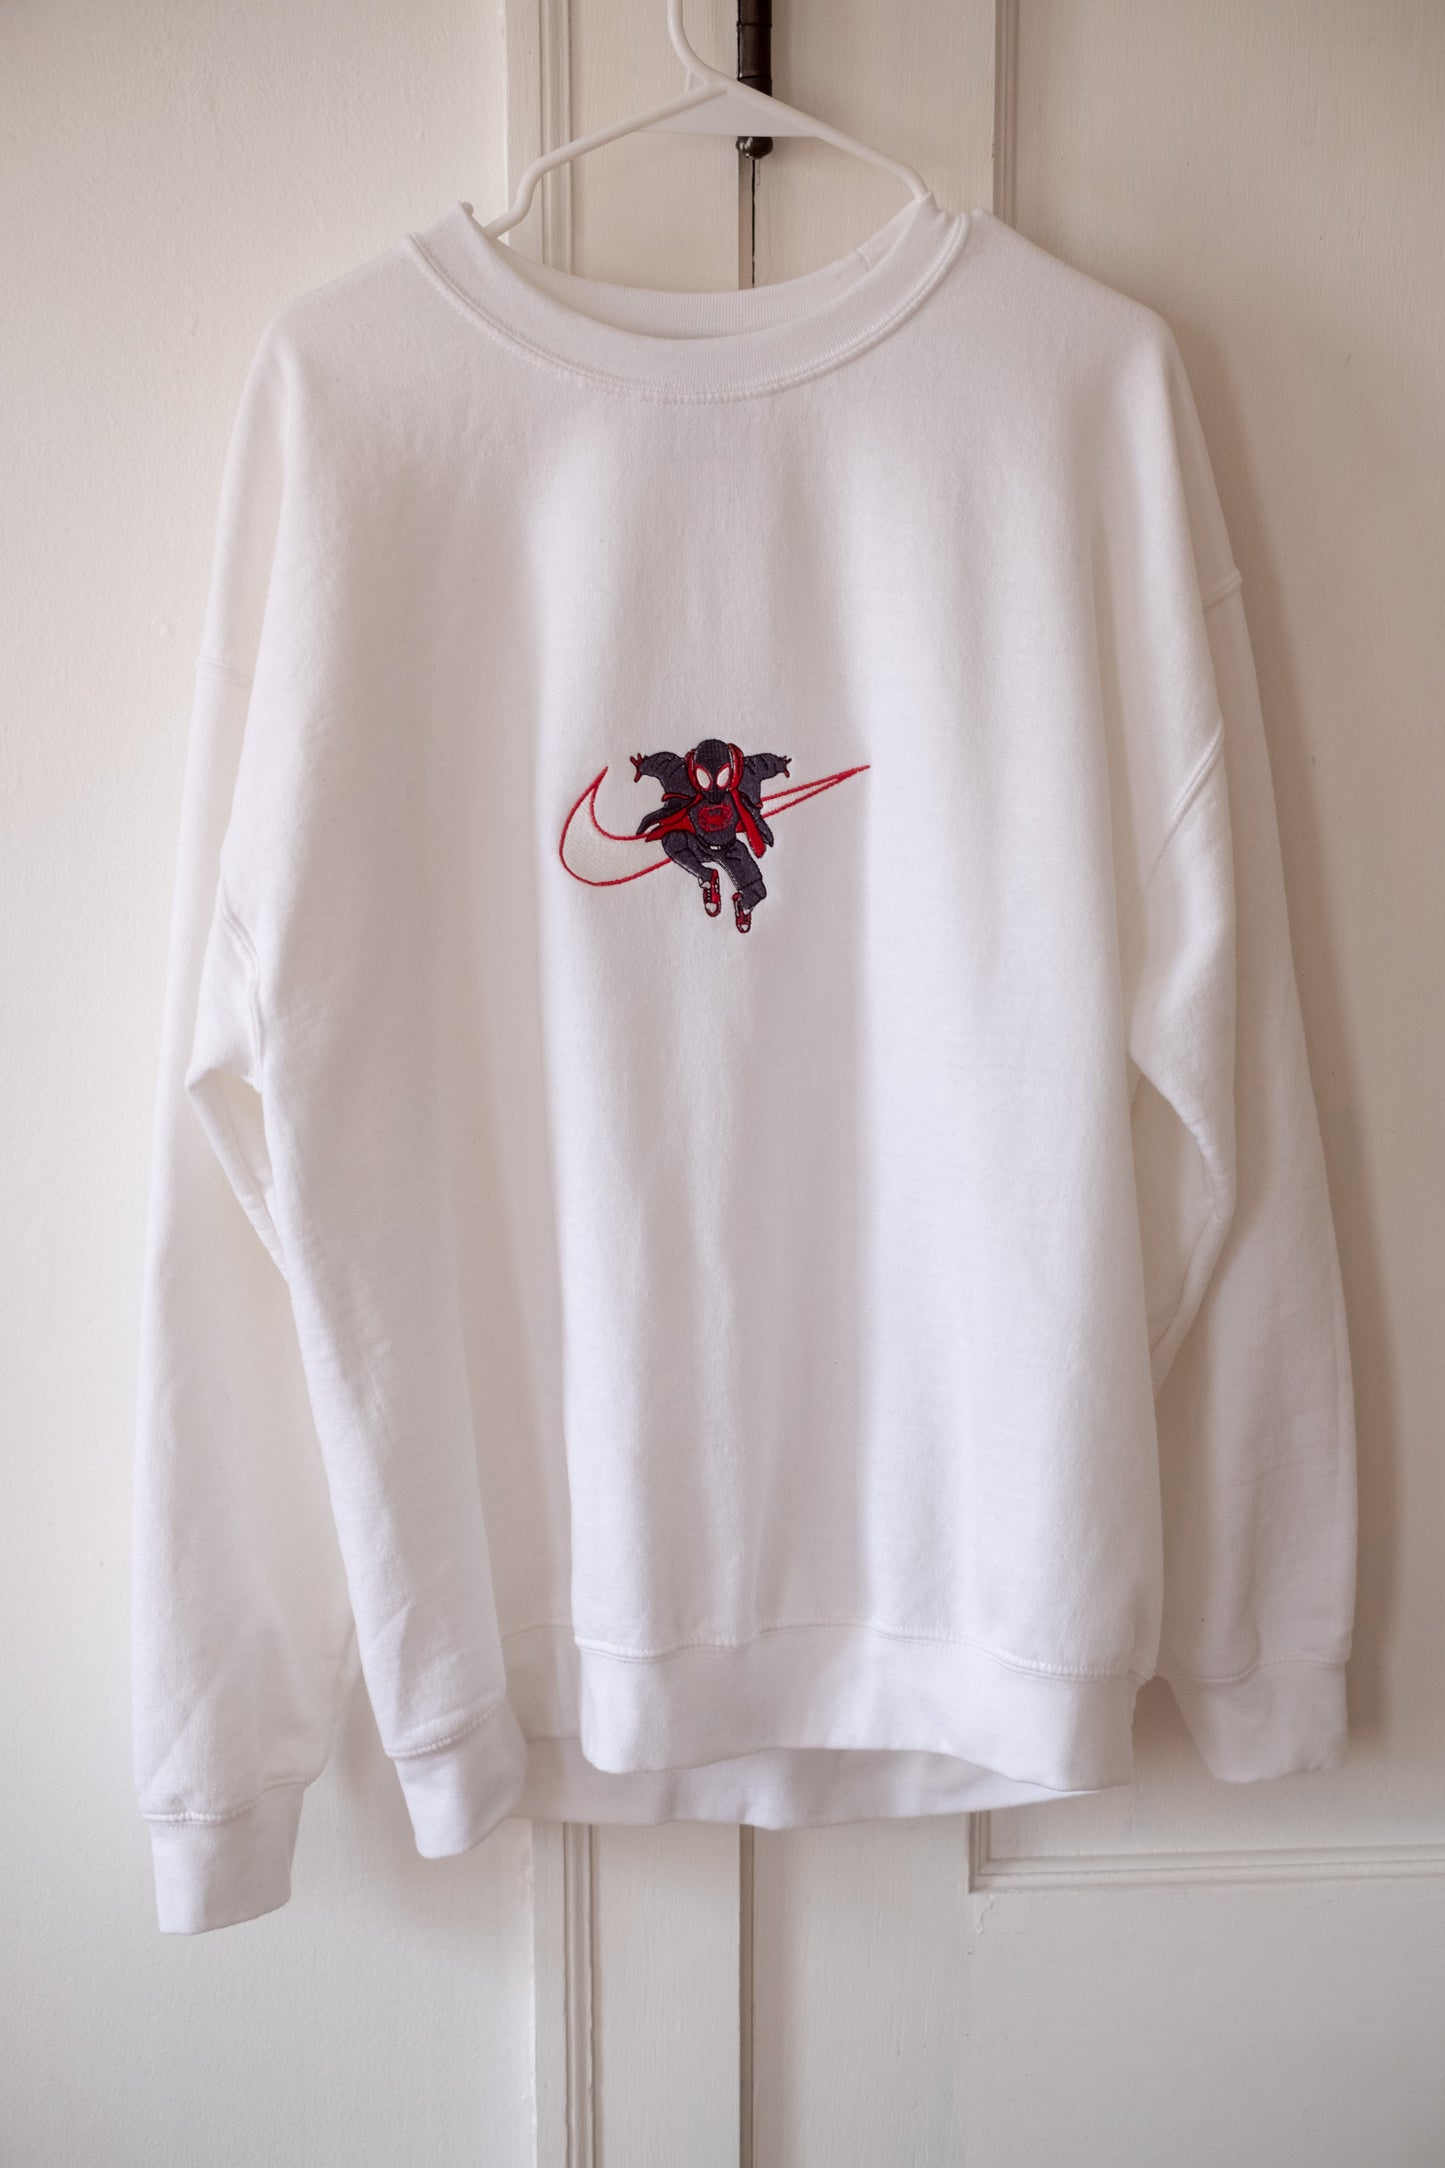 Spider-Man Across The Spider-Verse Inspired Sweatshirt with Swoosh | Miles Morales | Embroidery Apparel